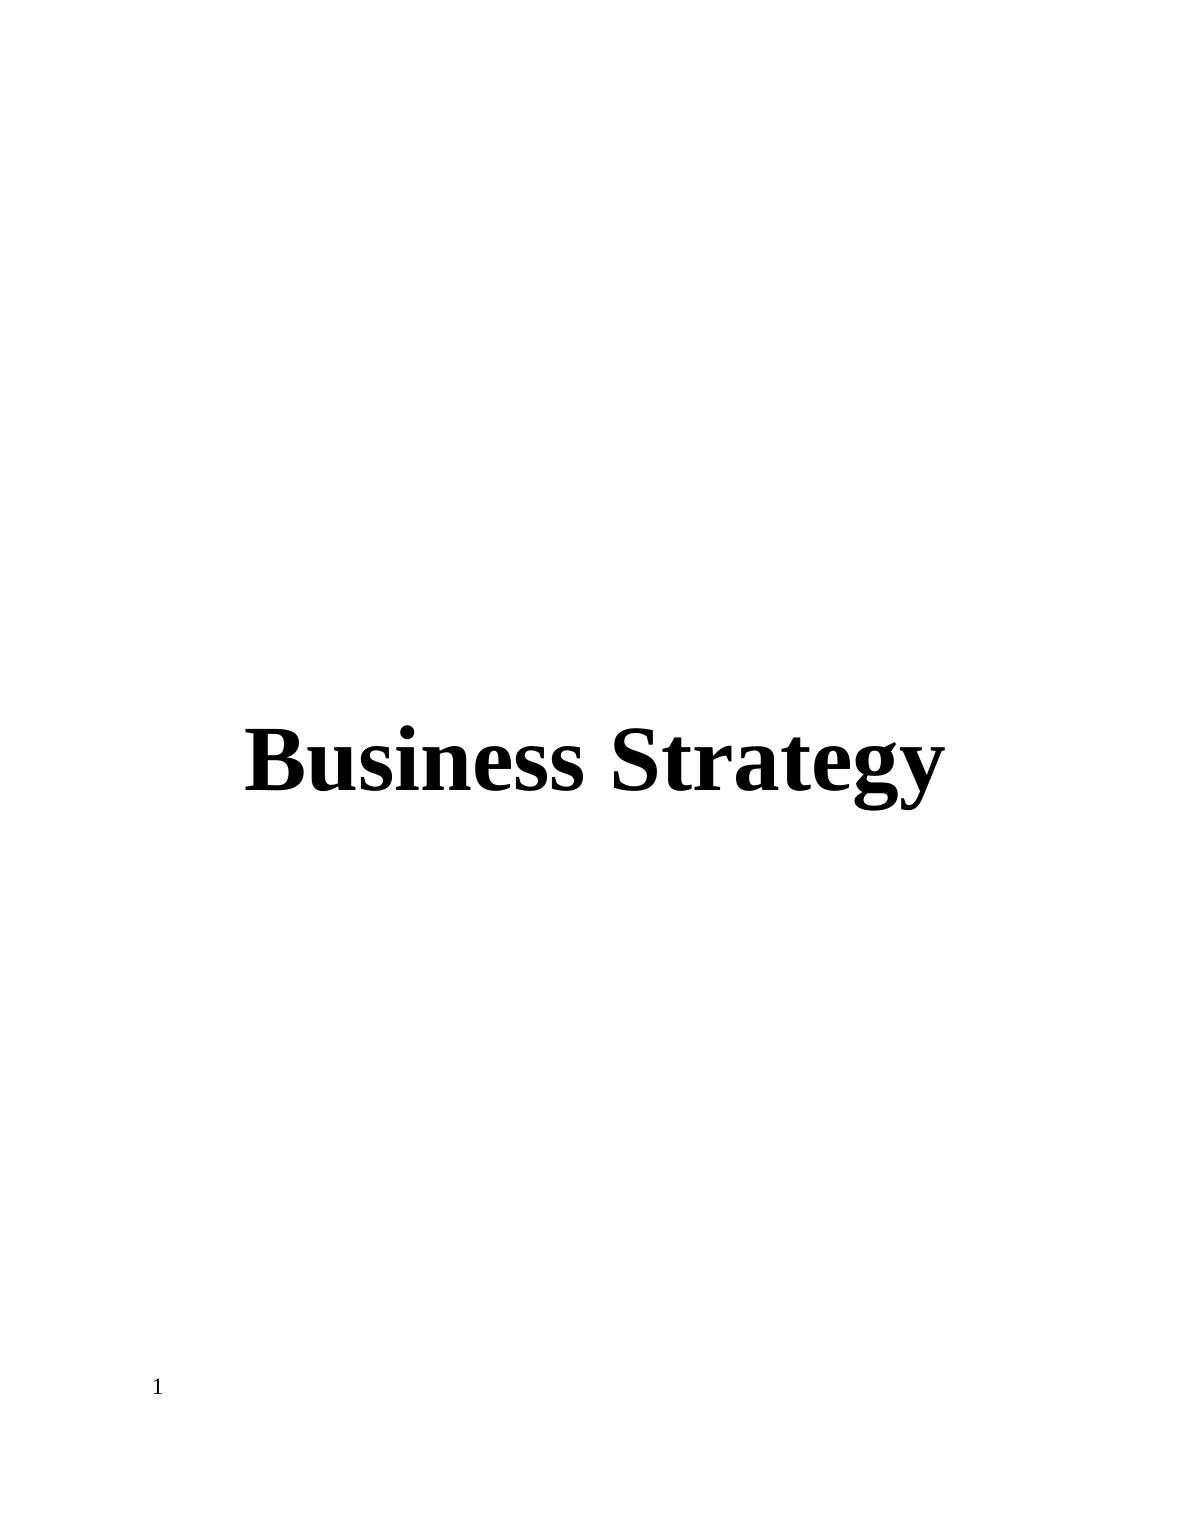 Report On The Business Strategies Of Sony Mobile Communications (SMC)_1